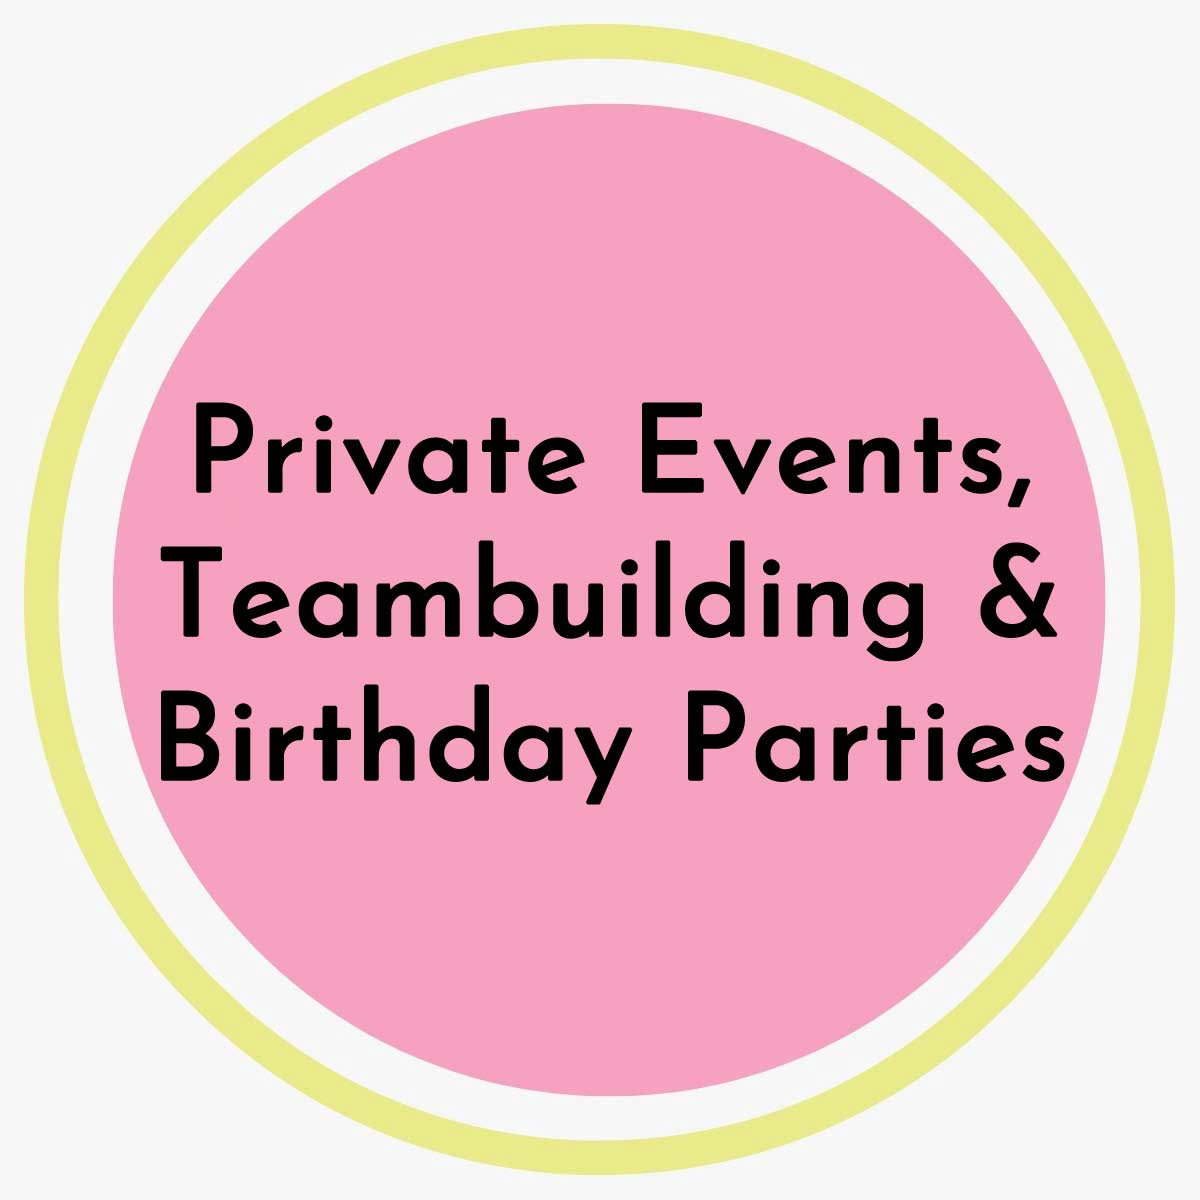 Events and parties